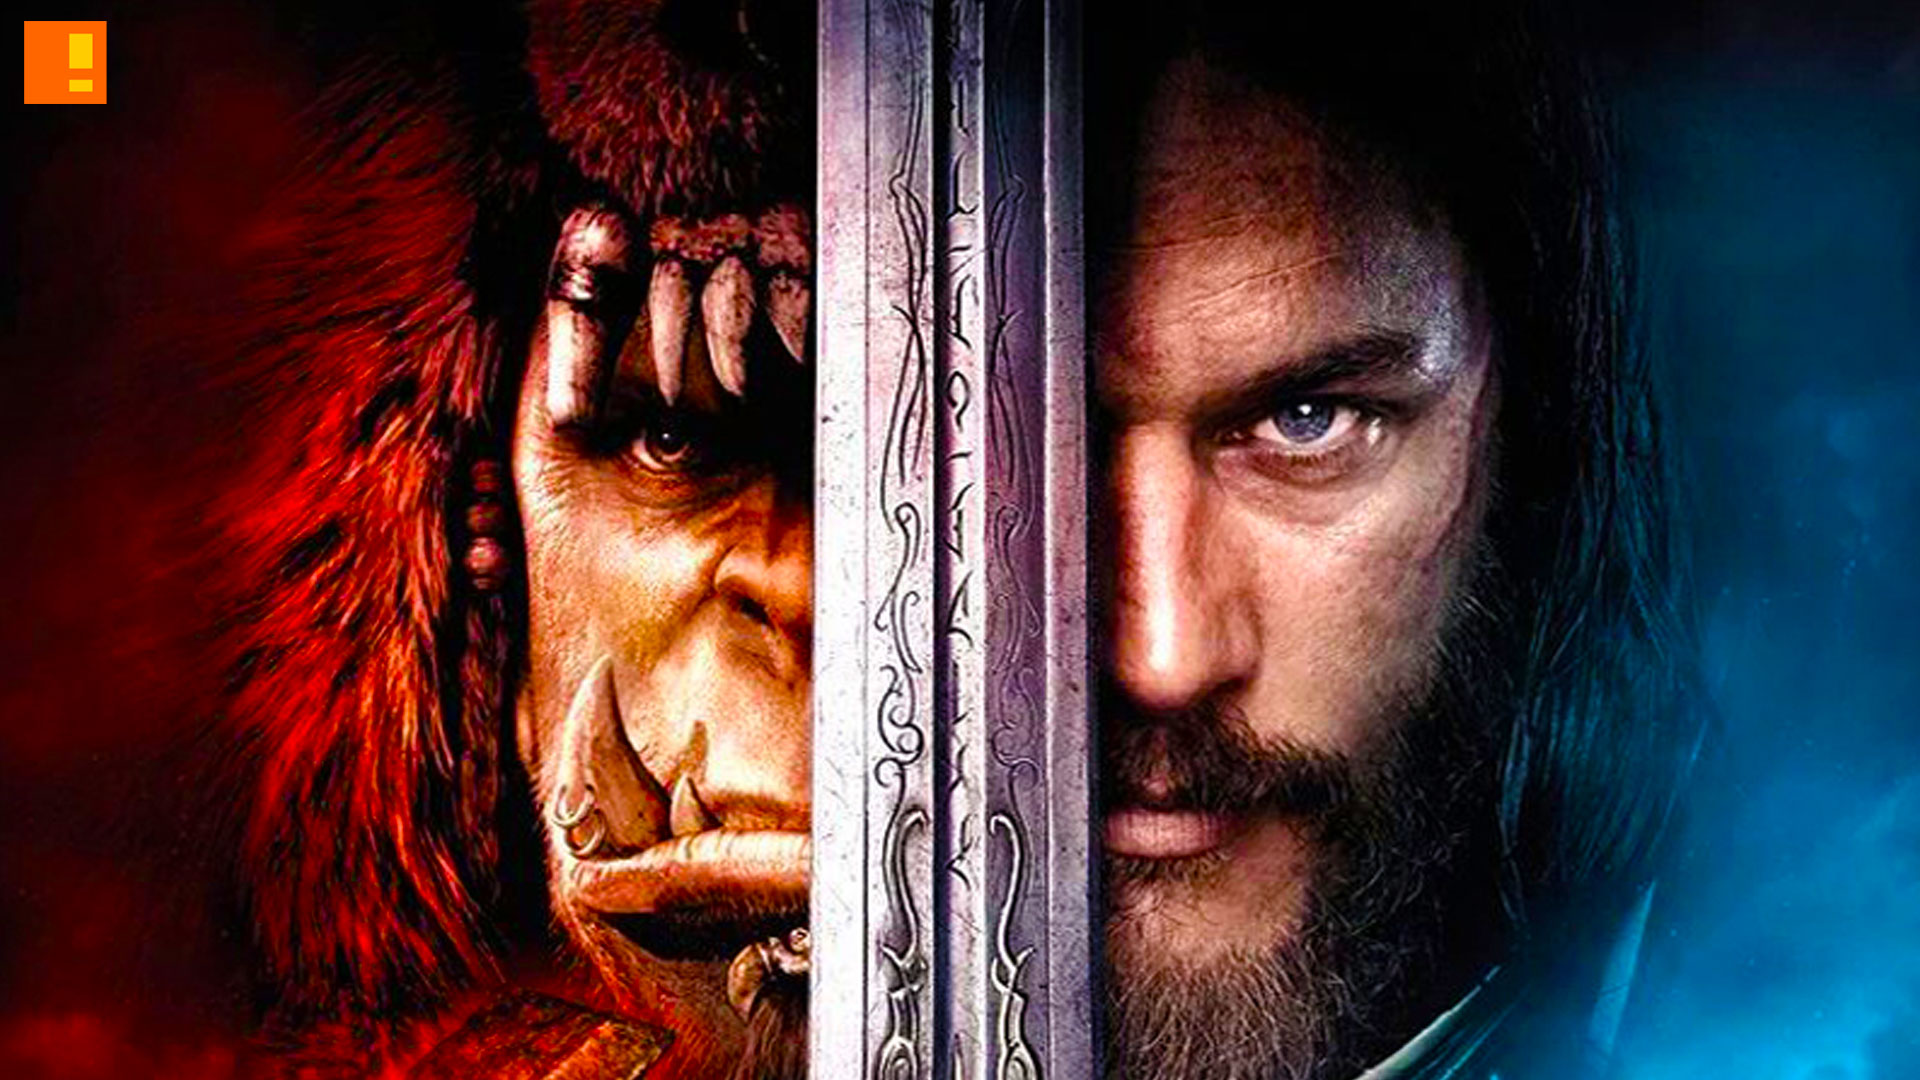 warcraft the beginning. poster. the action pixel. Legendary, world of warcraft. blizzard entertainment. the action pixel. @theactionpixel